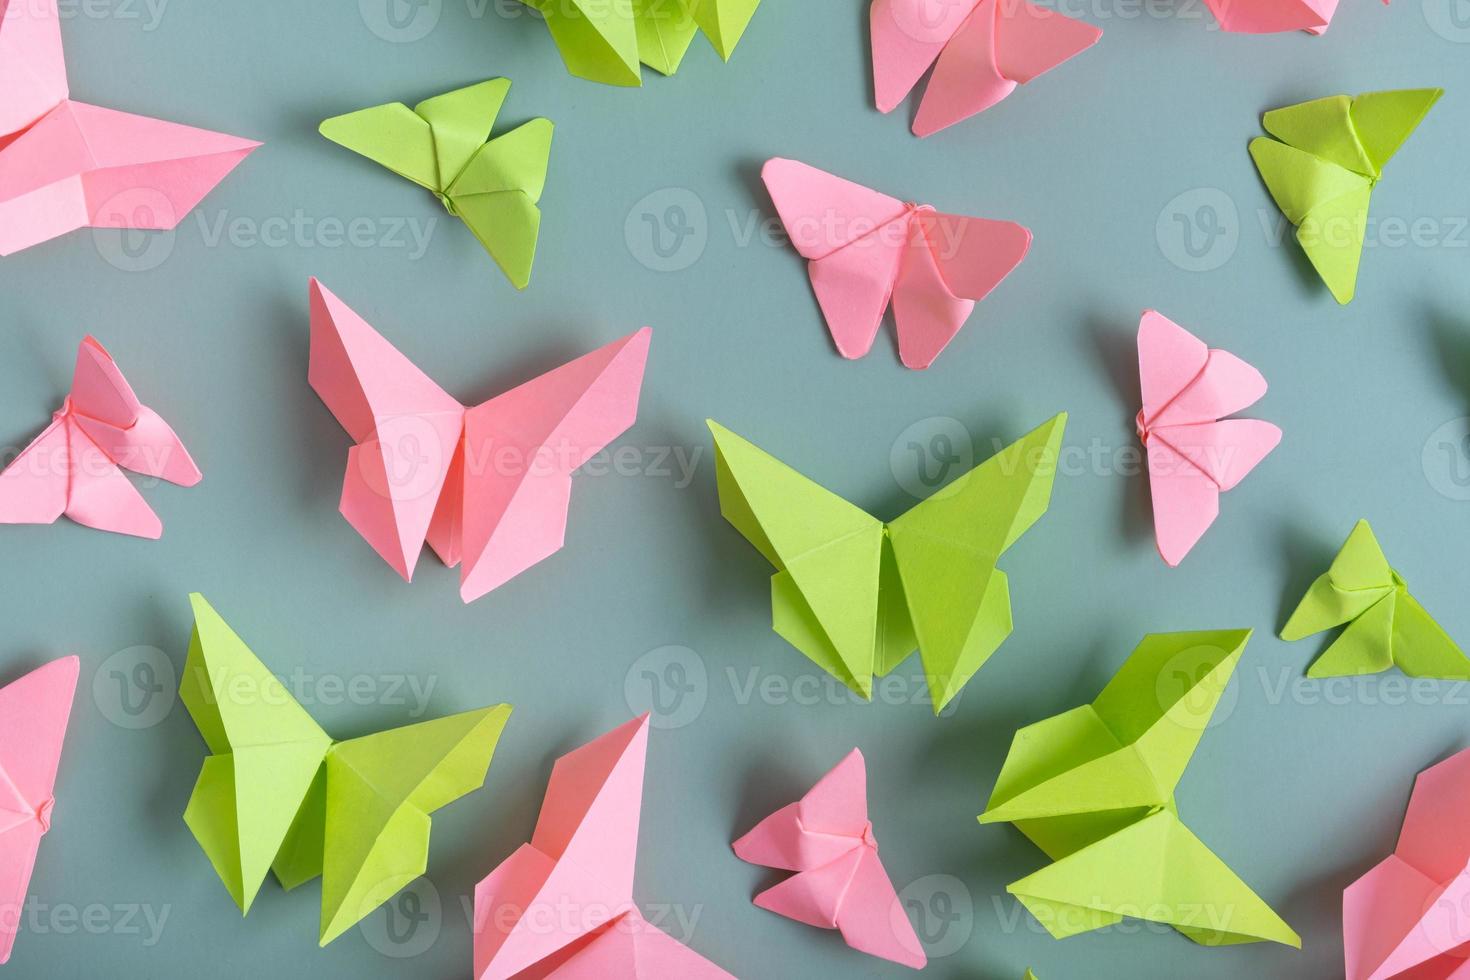 Paper butterfies green and pink color flat lay on a colored background. Lightness, spring beauty concept photo